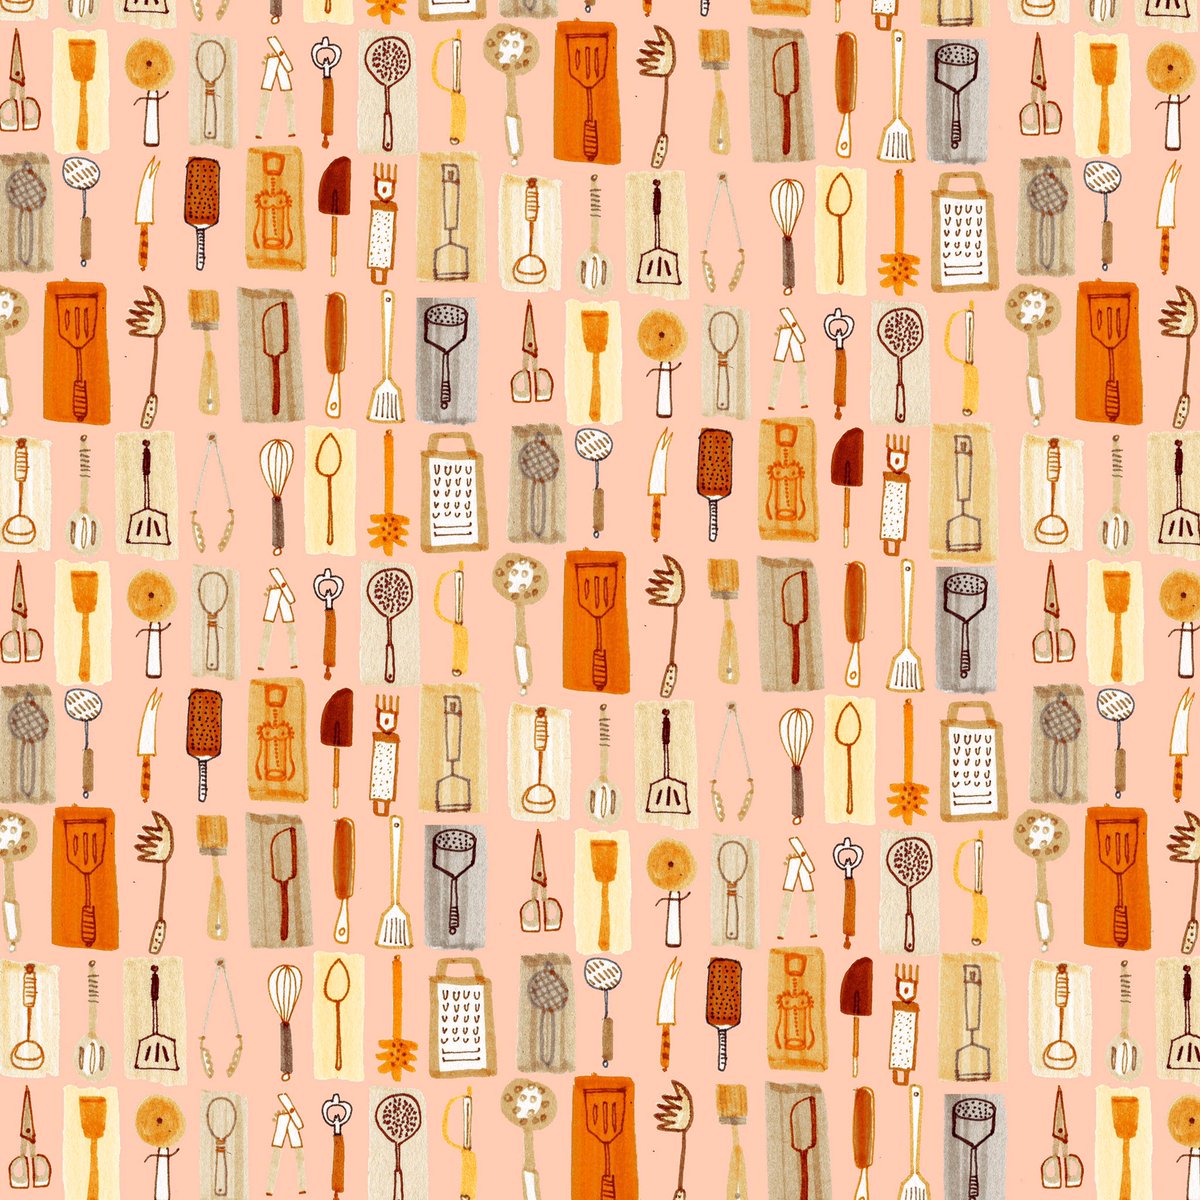 A recent kitchen utensils drawing- repeated and recoloured. #pattern #kitchenutensils #surfacepattern #ArtistOnTwitter #thedailysketch